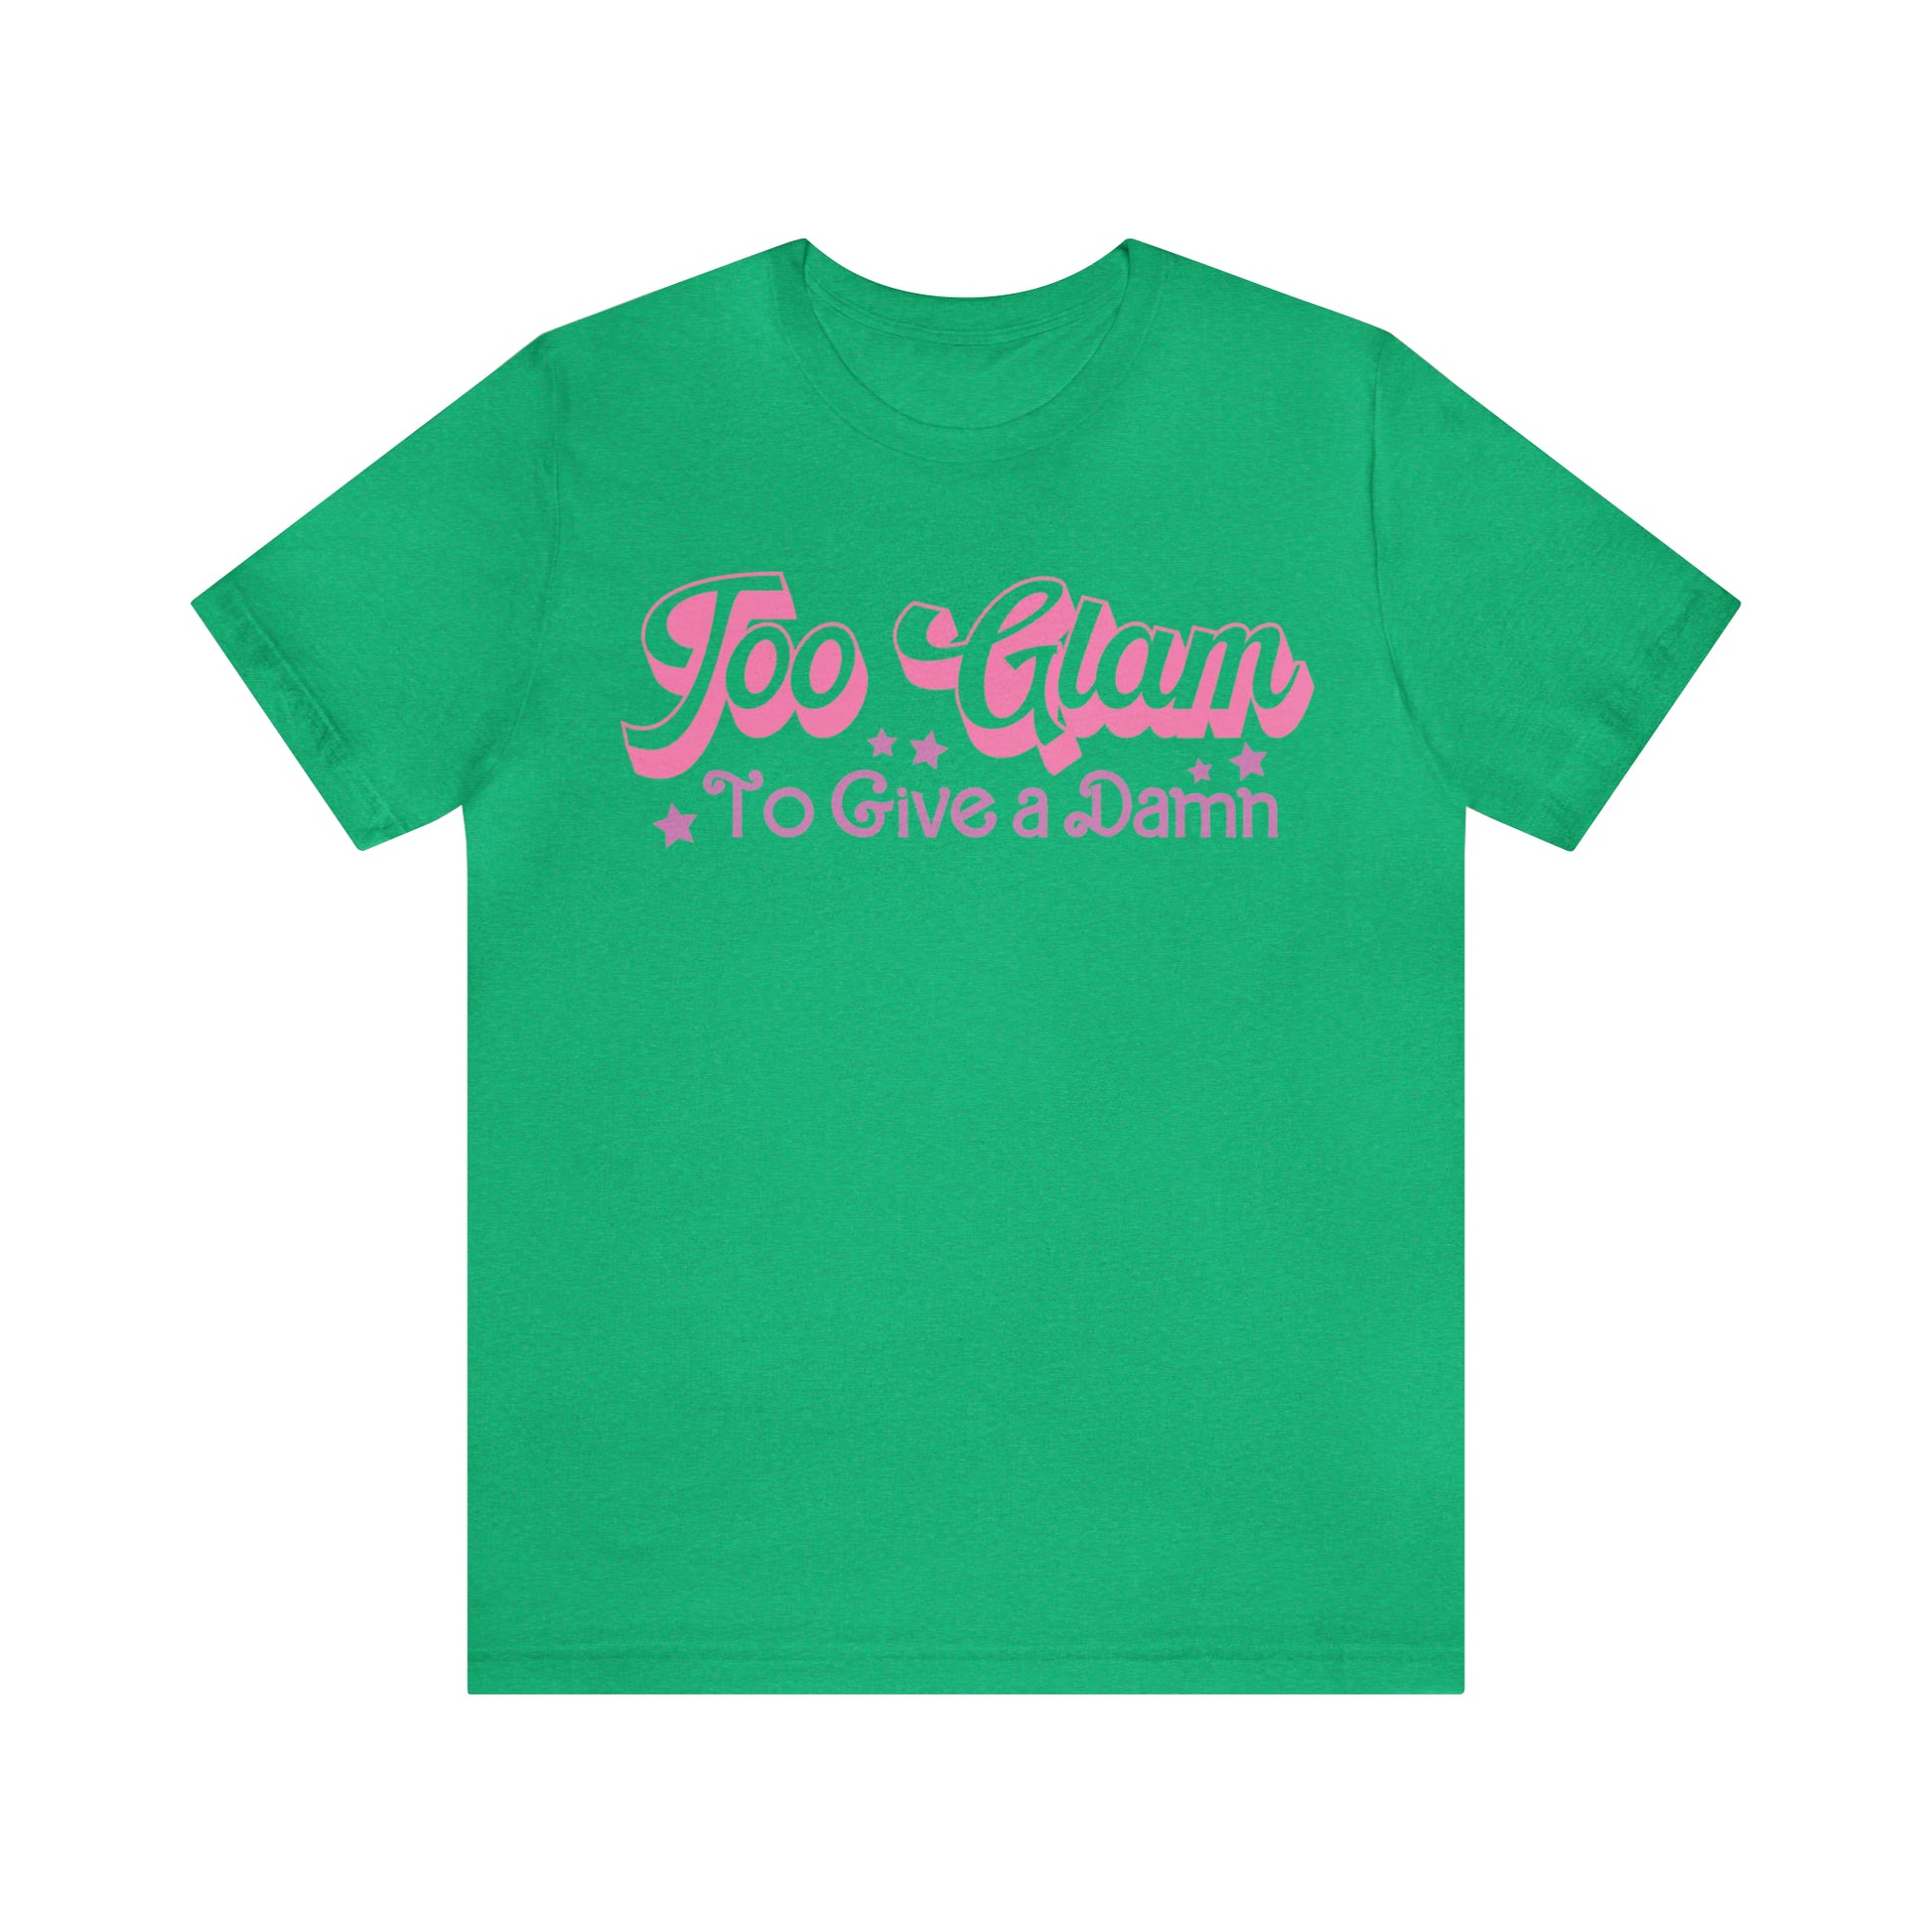 Too Glam To Give a Damn Funny Sarcastic Shirt for Girls